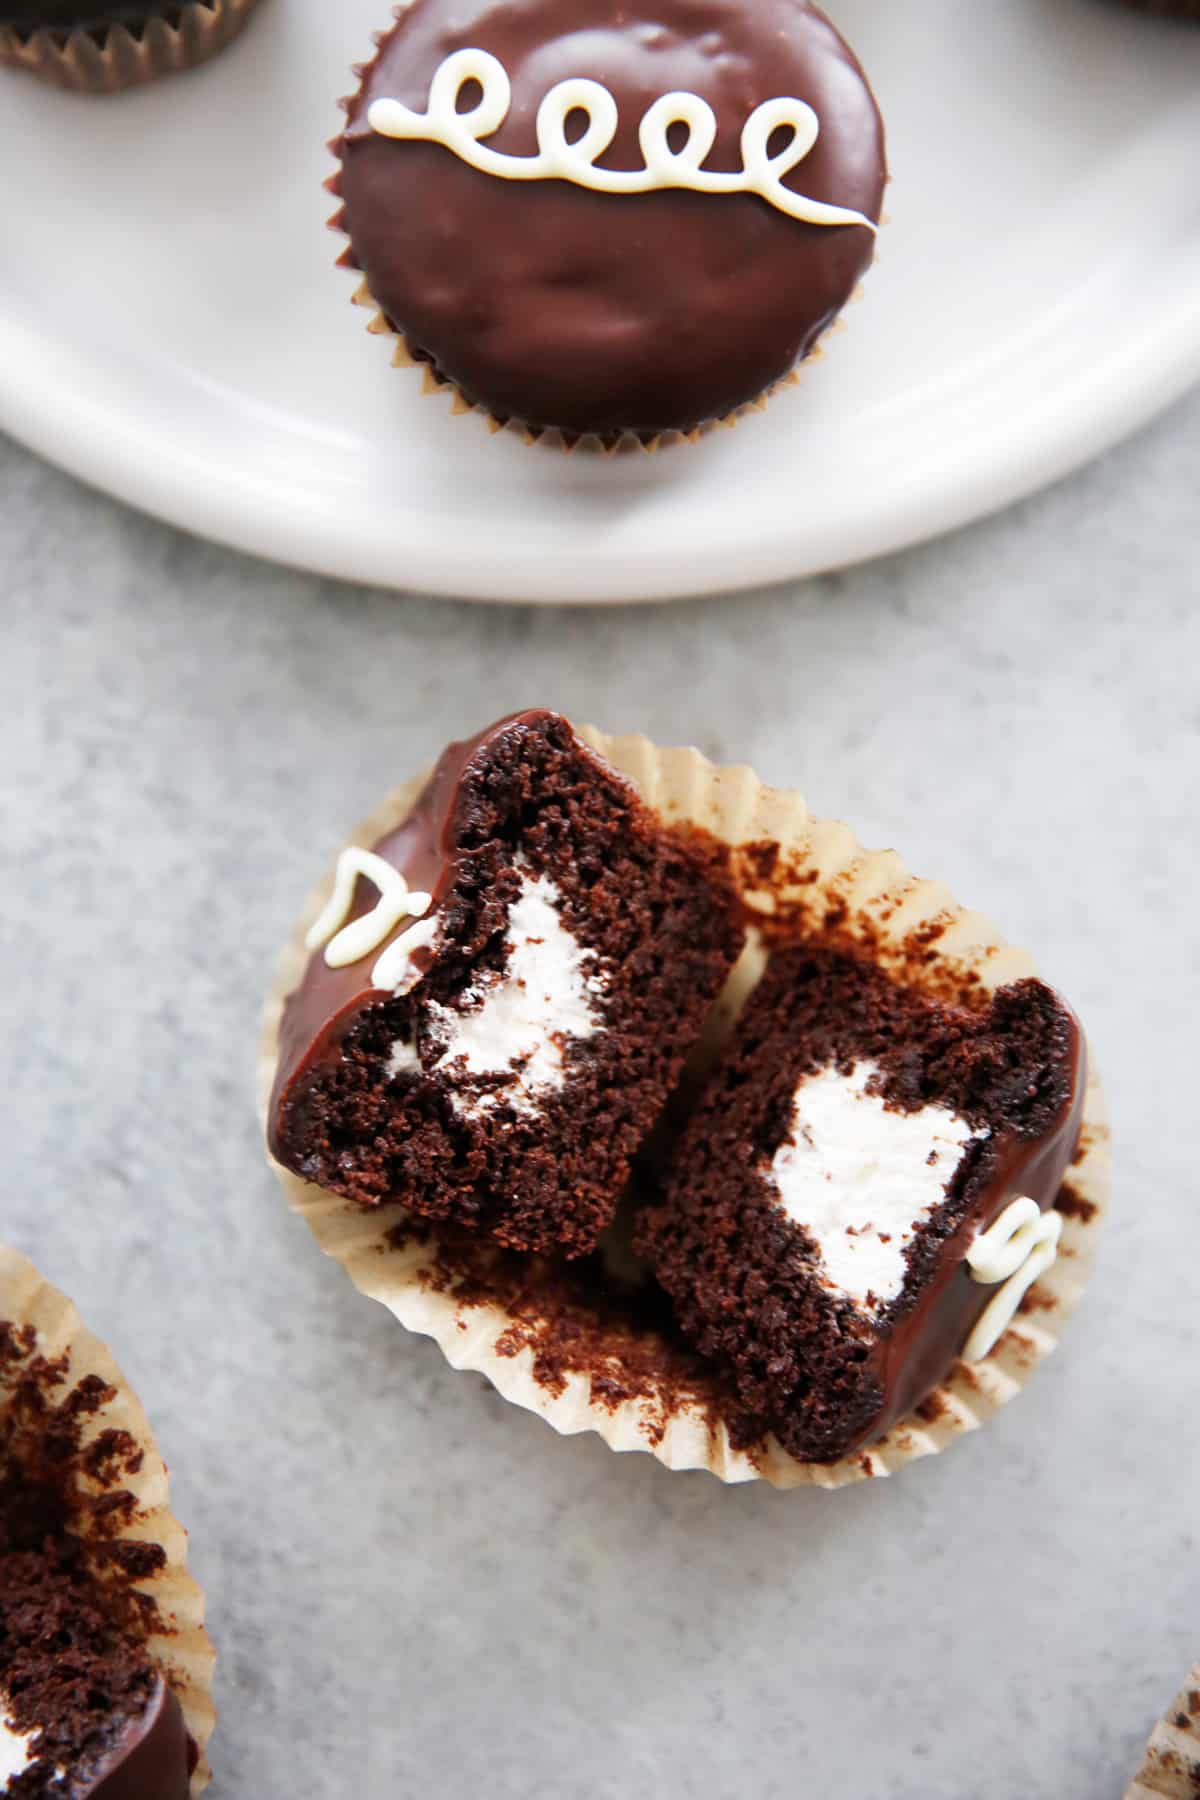 Homemade hostess style cupcakes cut down the middle with a fluffy center.